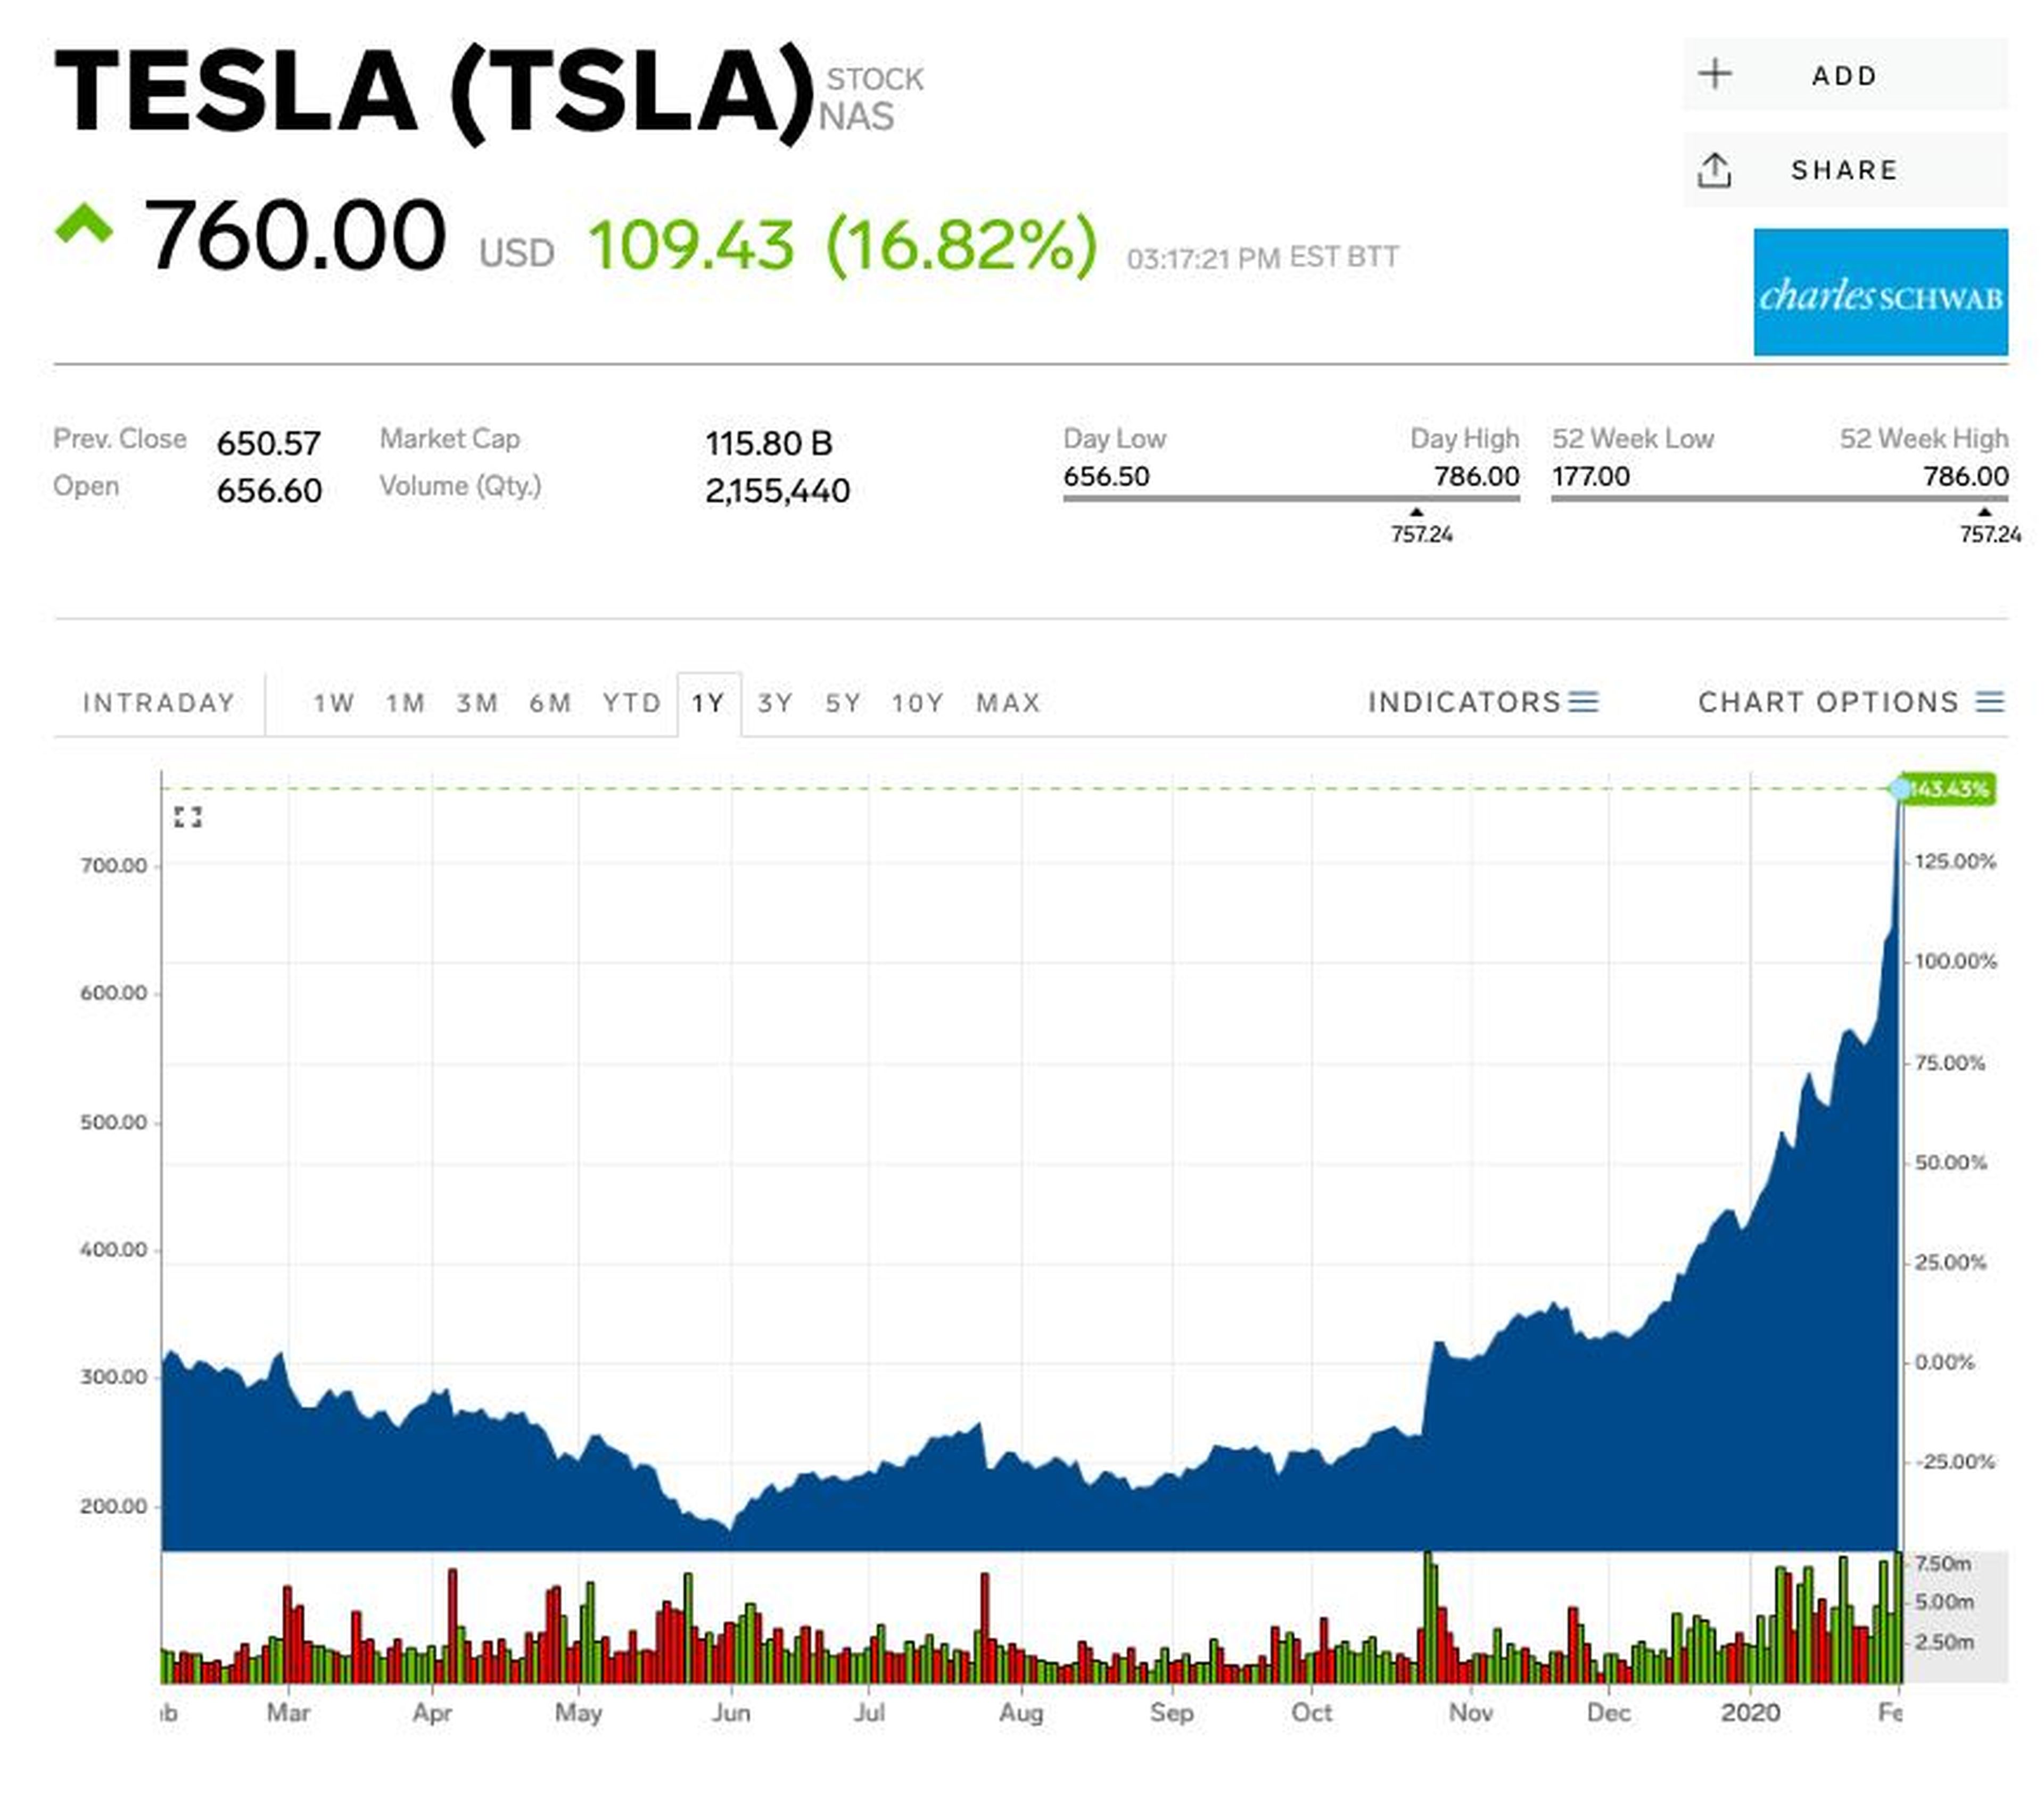 Traders betting against Tesla lost $2.5 billion in just one day as the stock soared to new highs